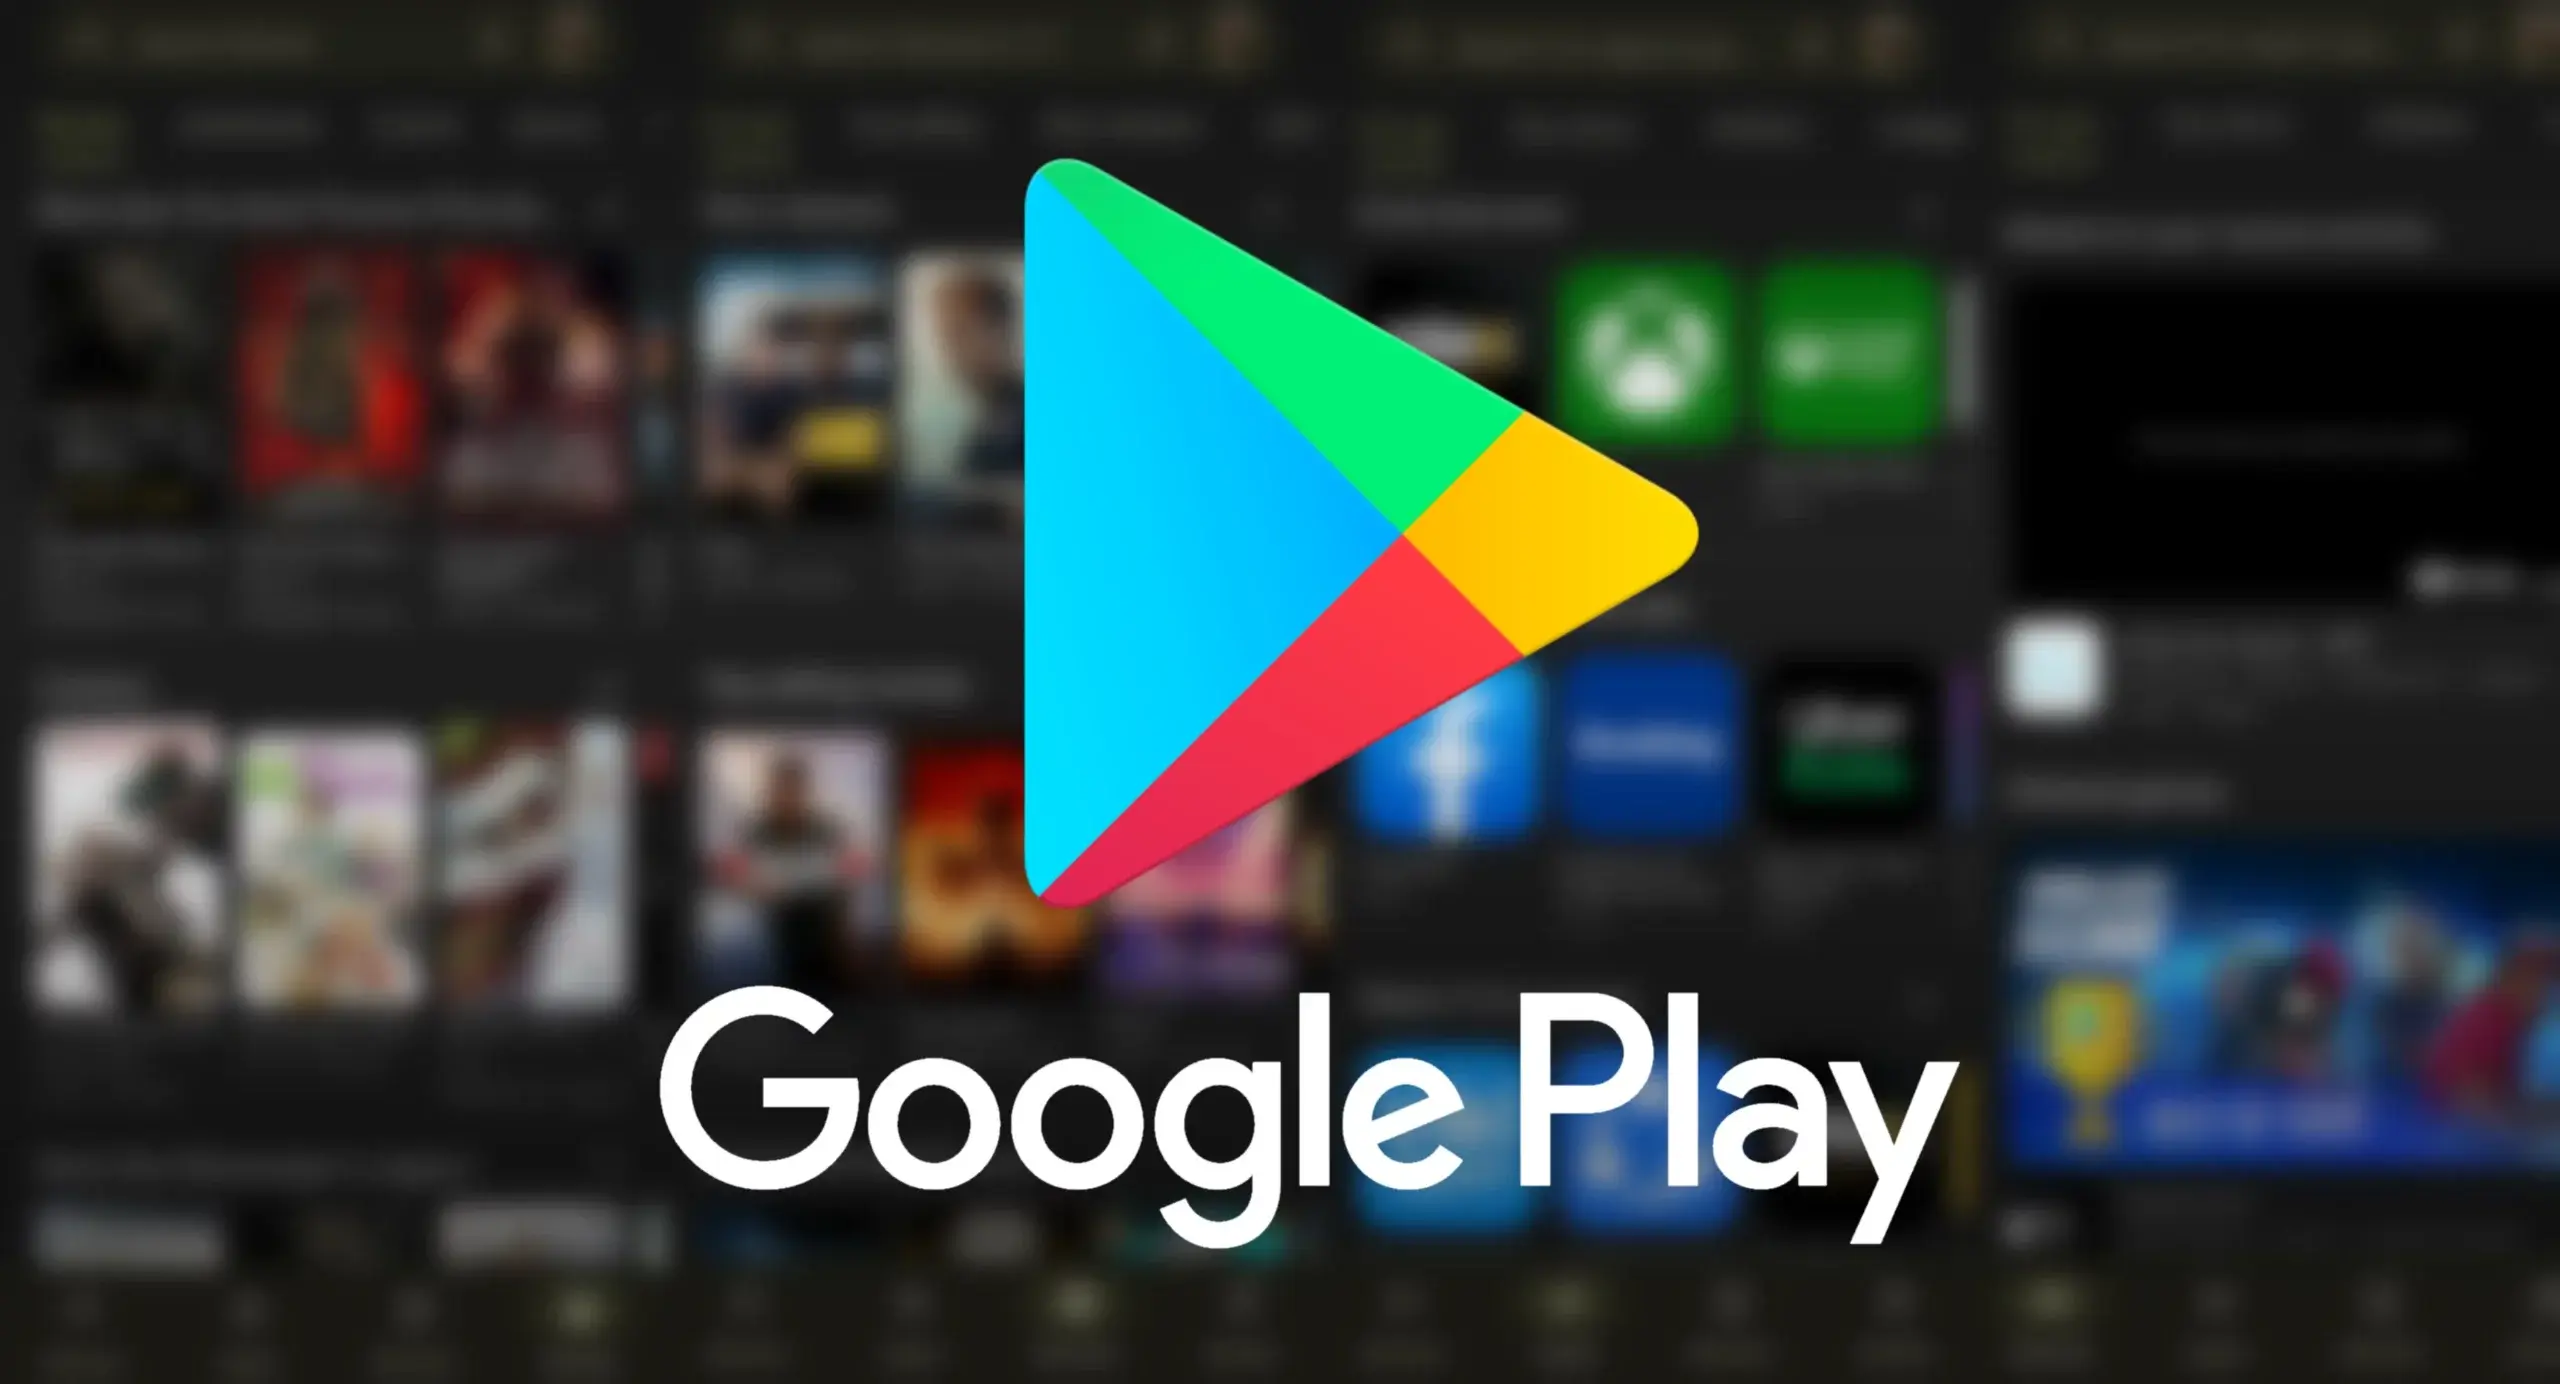 Android Apps by Jogatina.com on Google Play